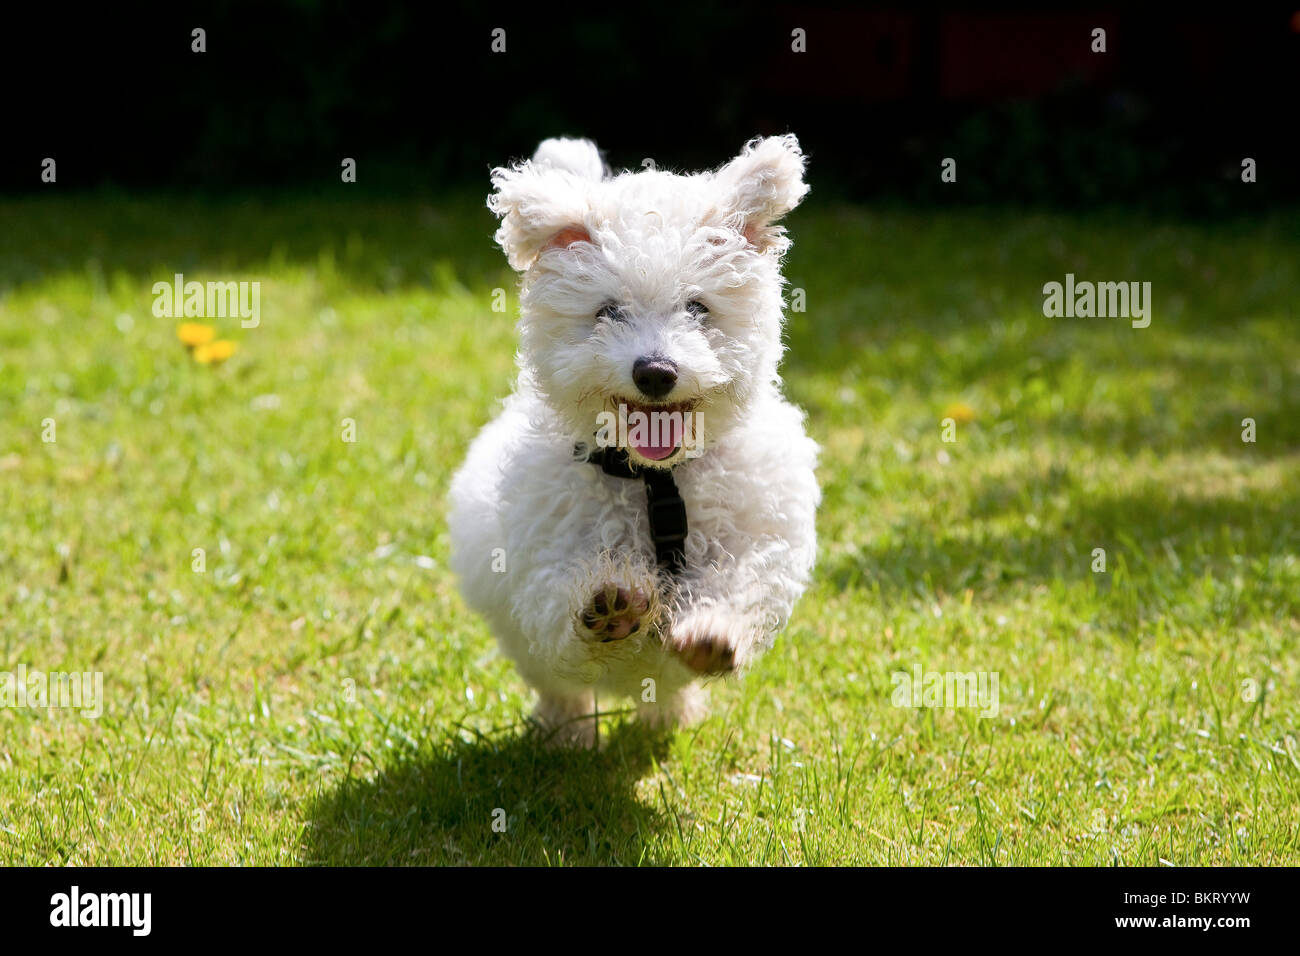 Bichon Frise puppy in action Stock Photo